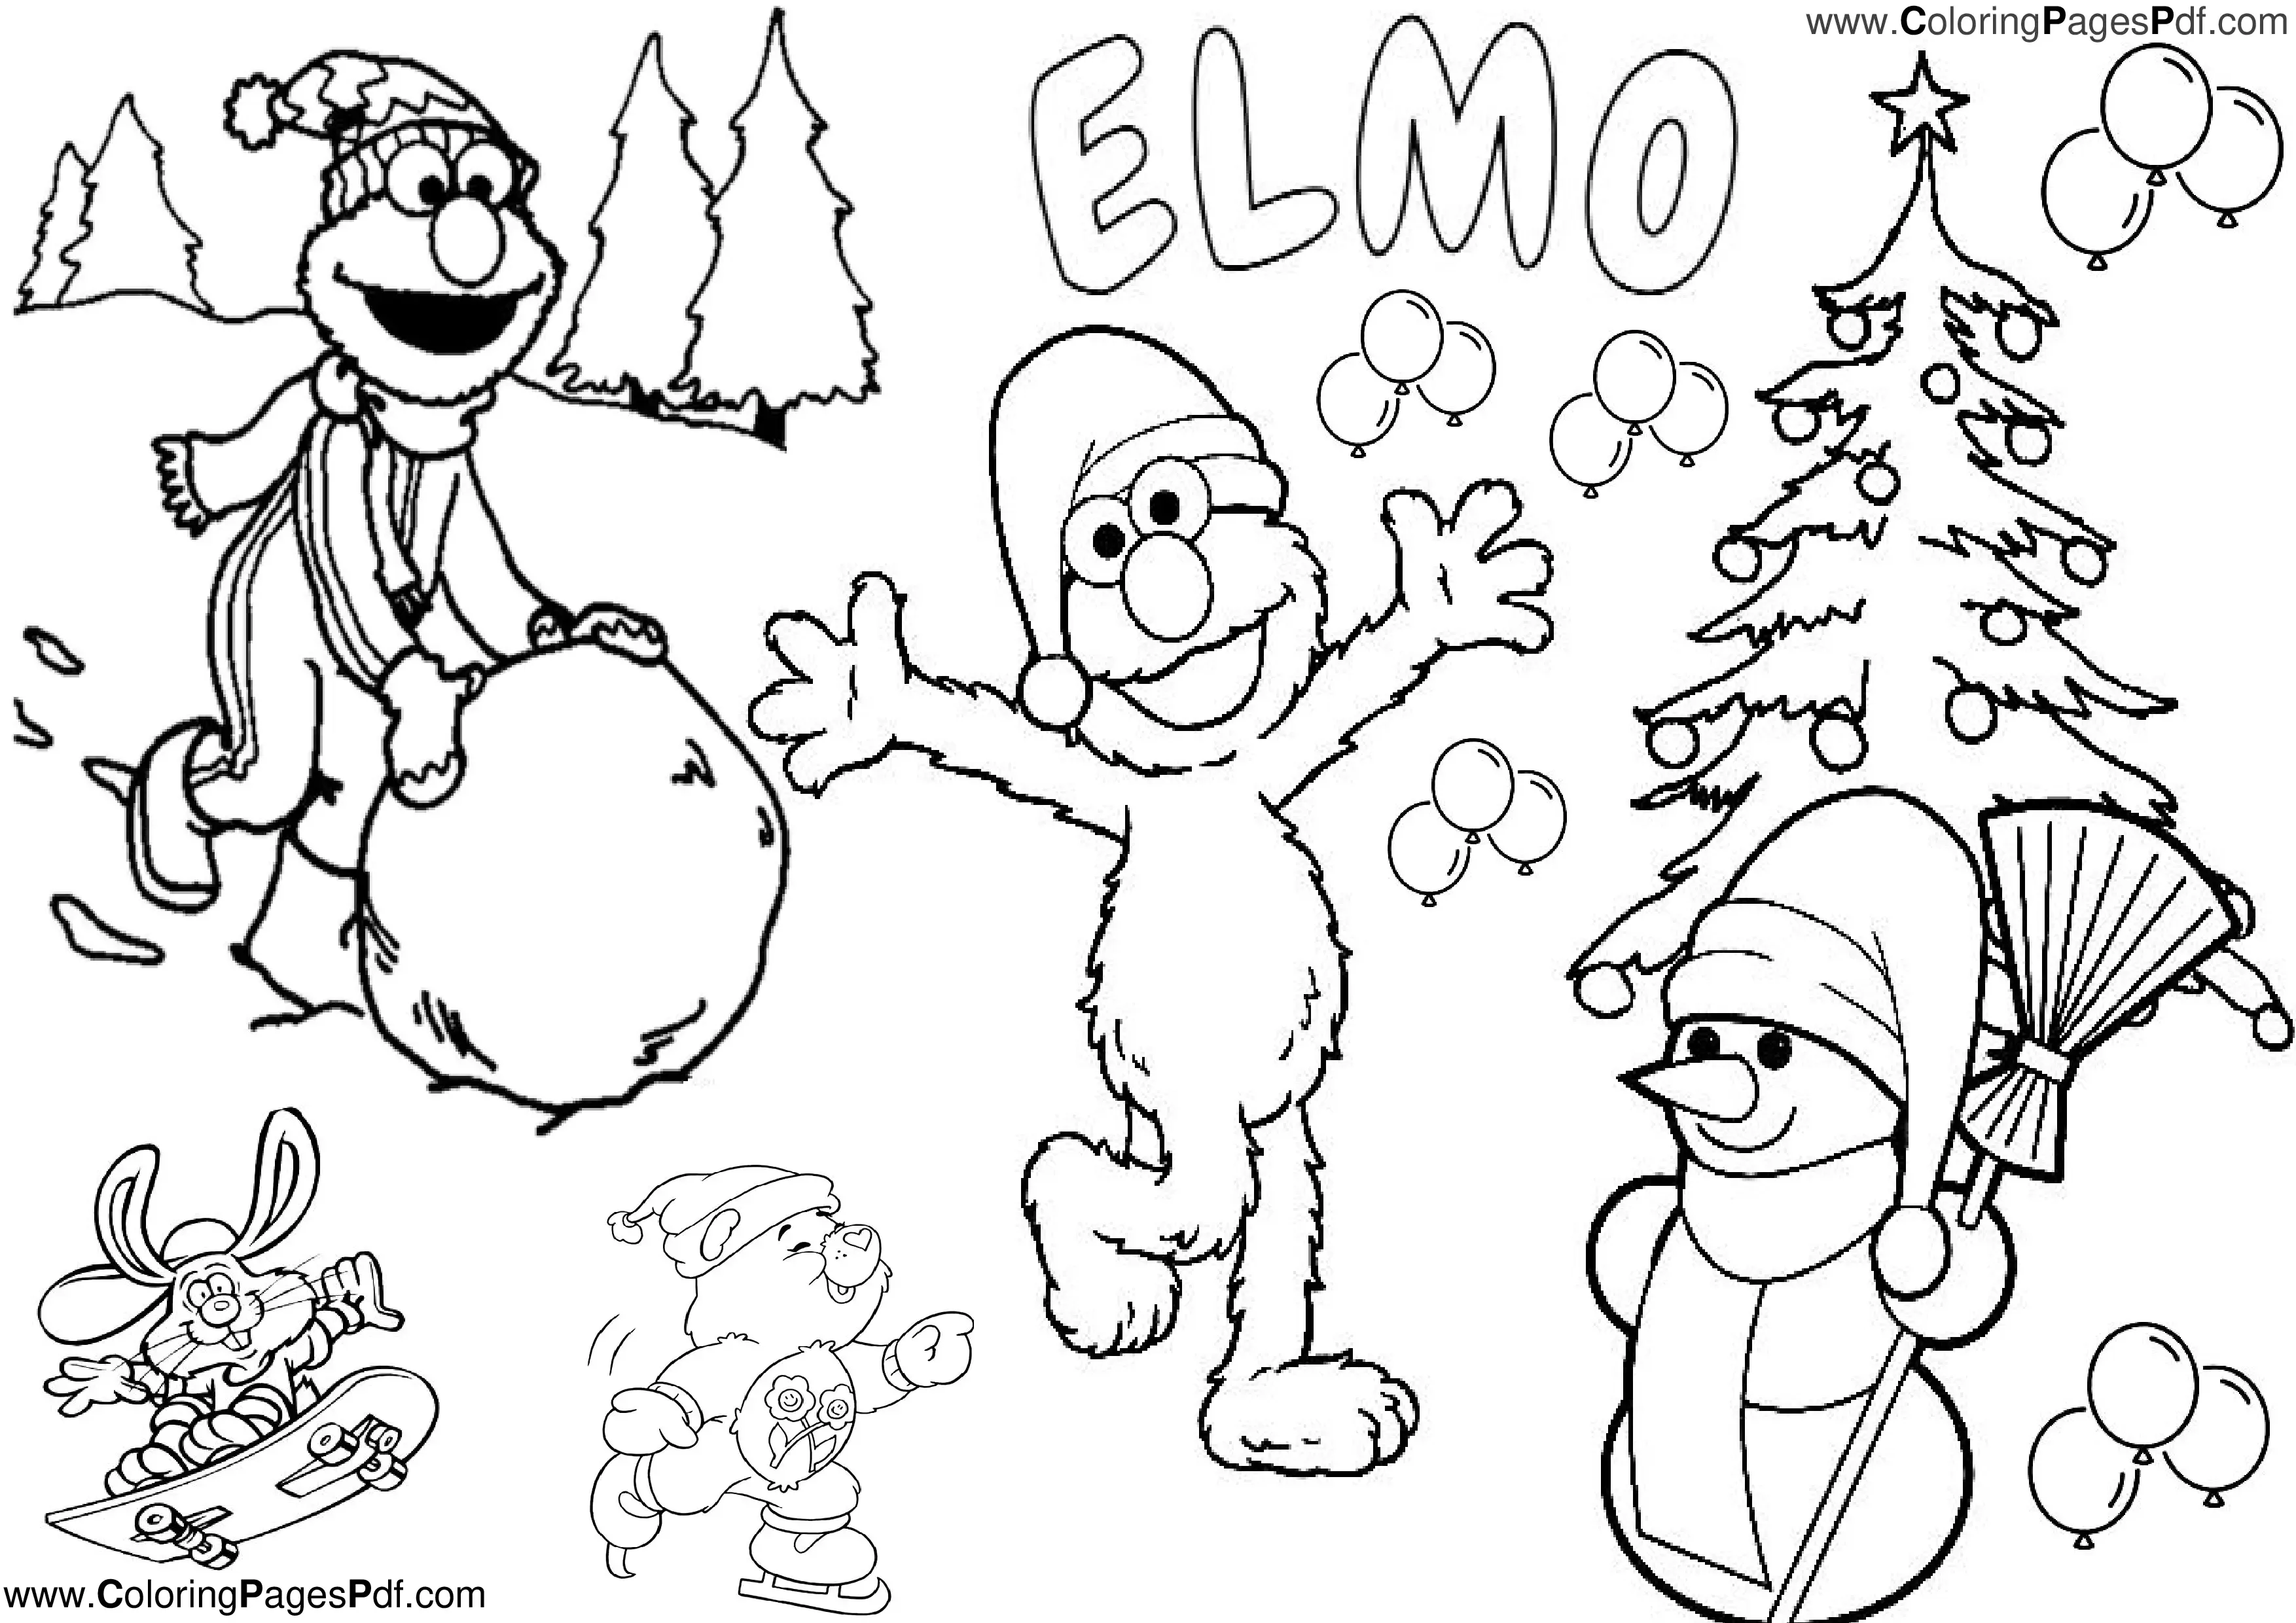 Elmo christmas coloring pages